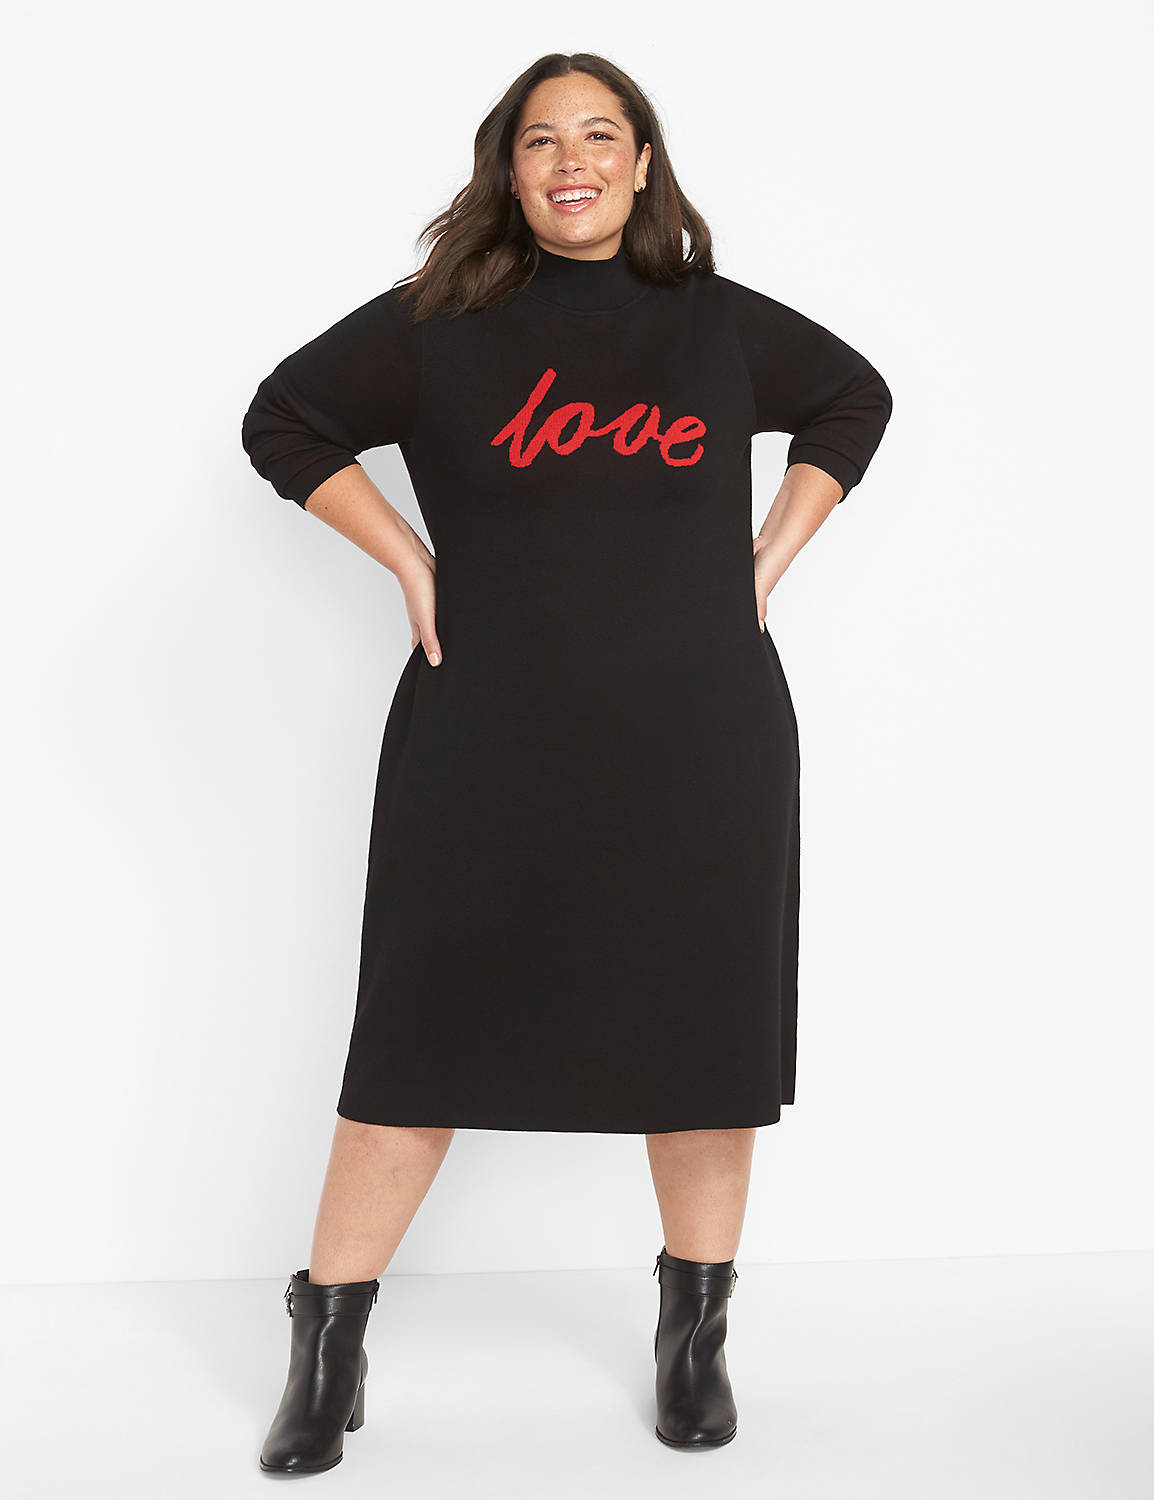 Long Sleeve Turtleneck Love Graphic Product Image 1